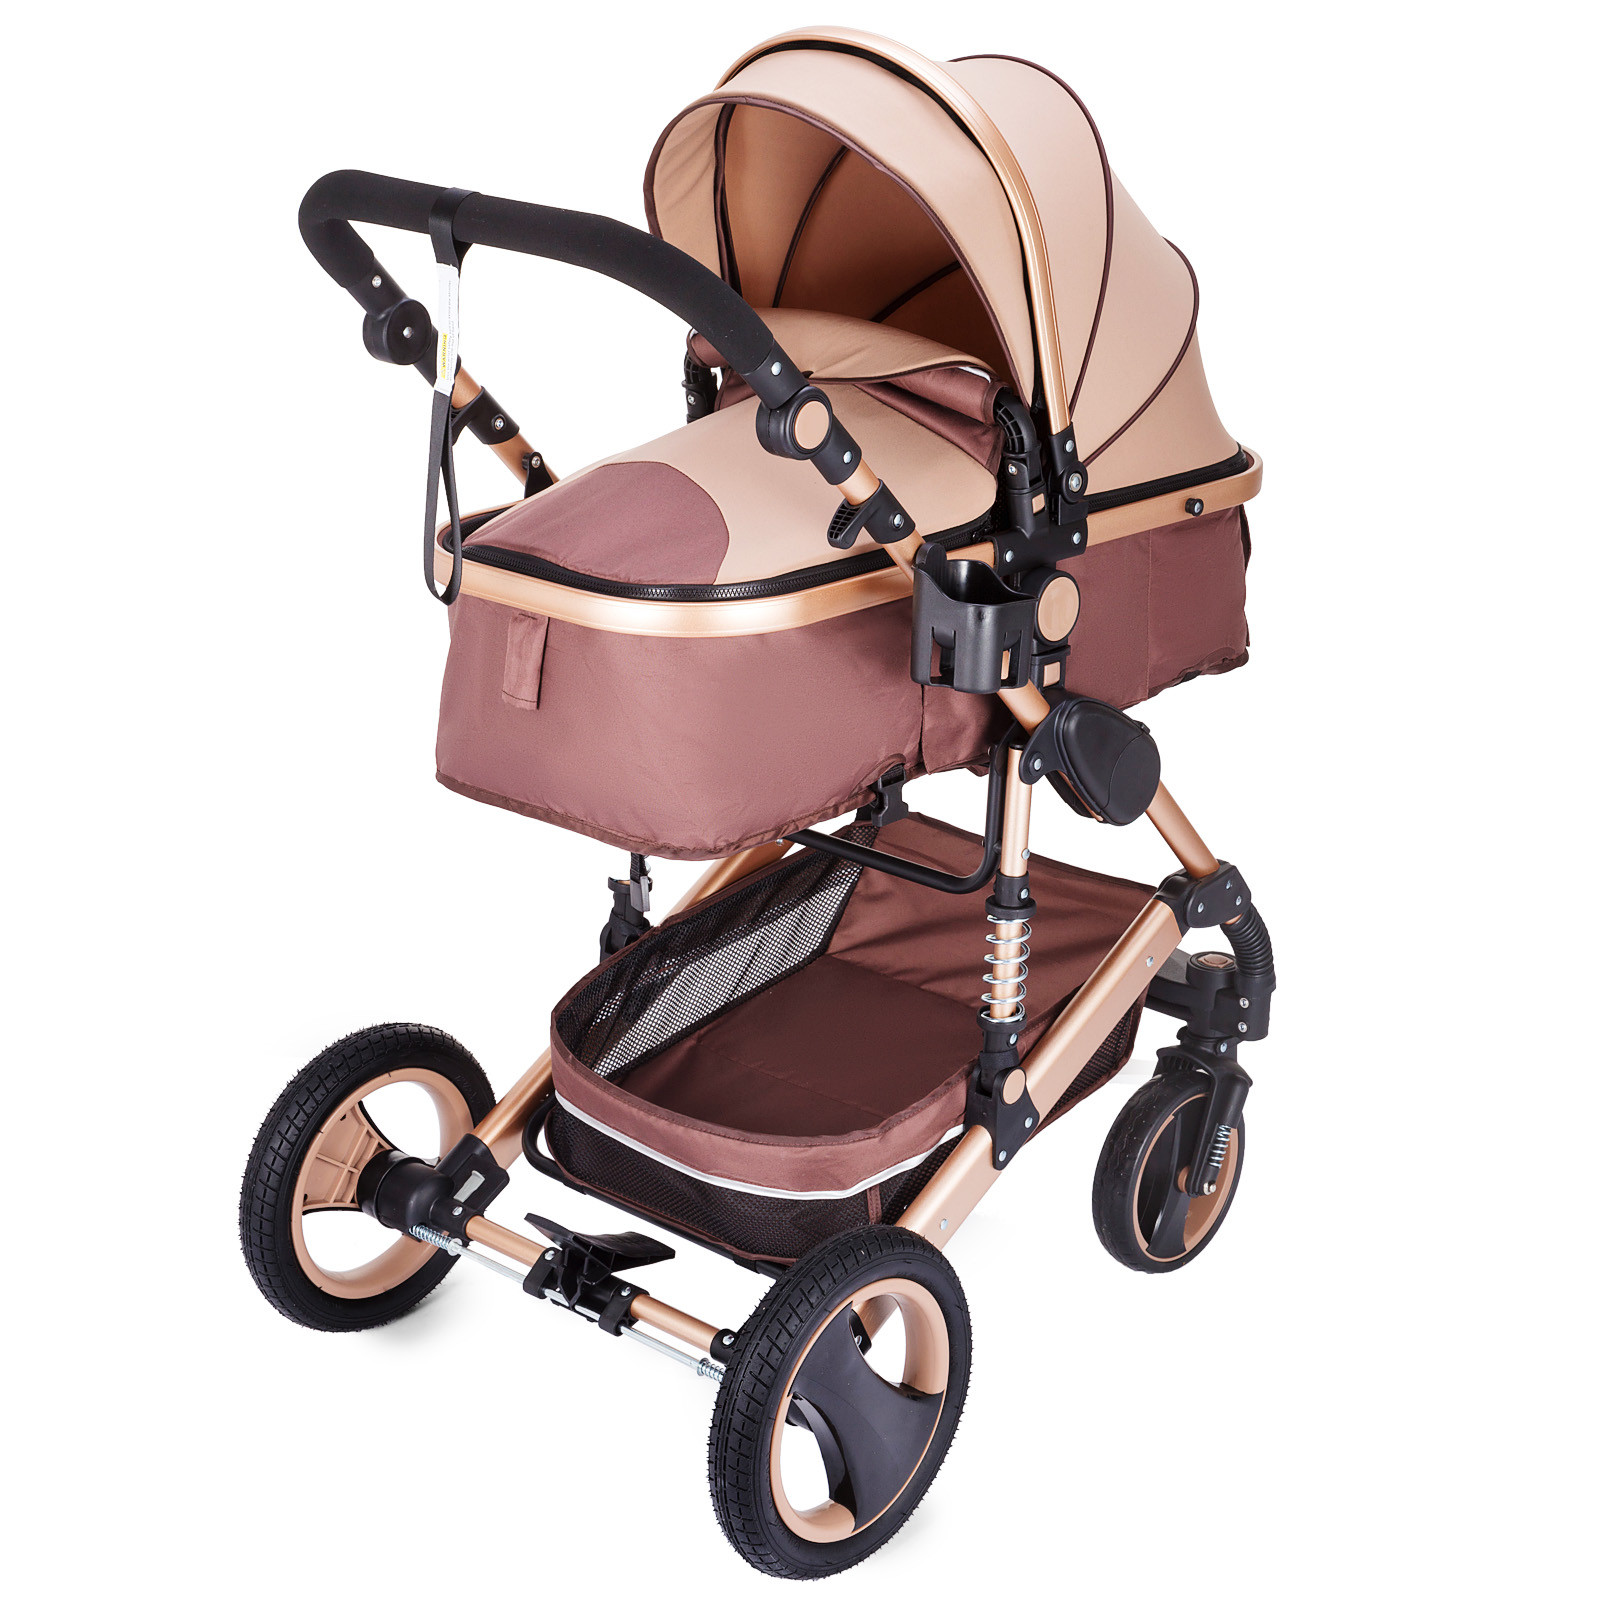 travel buggy 6 month old